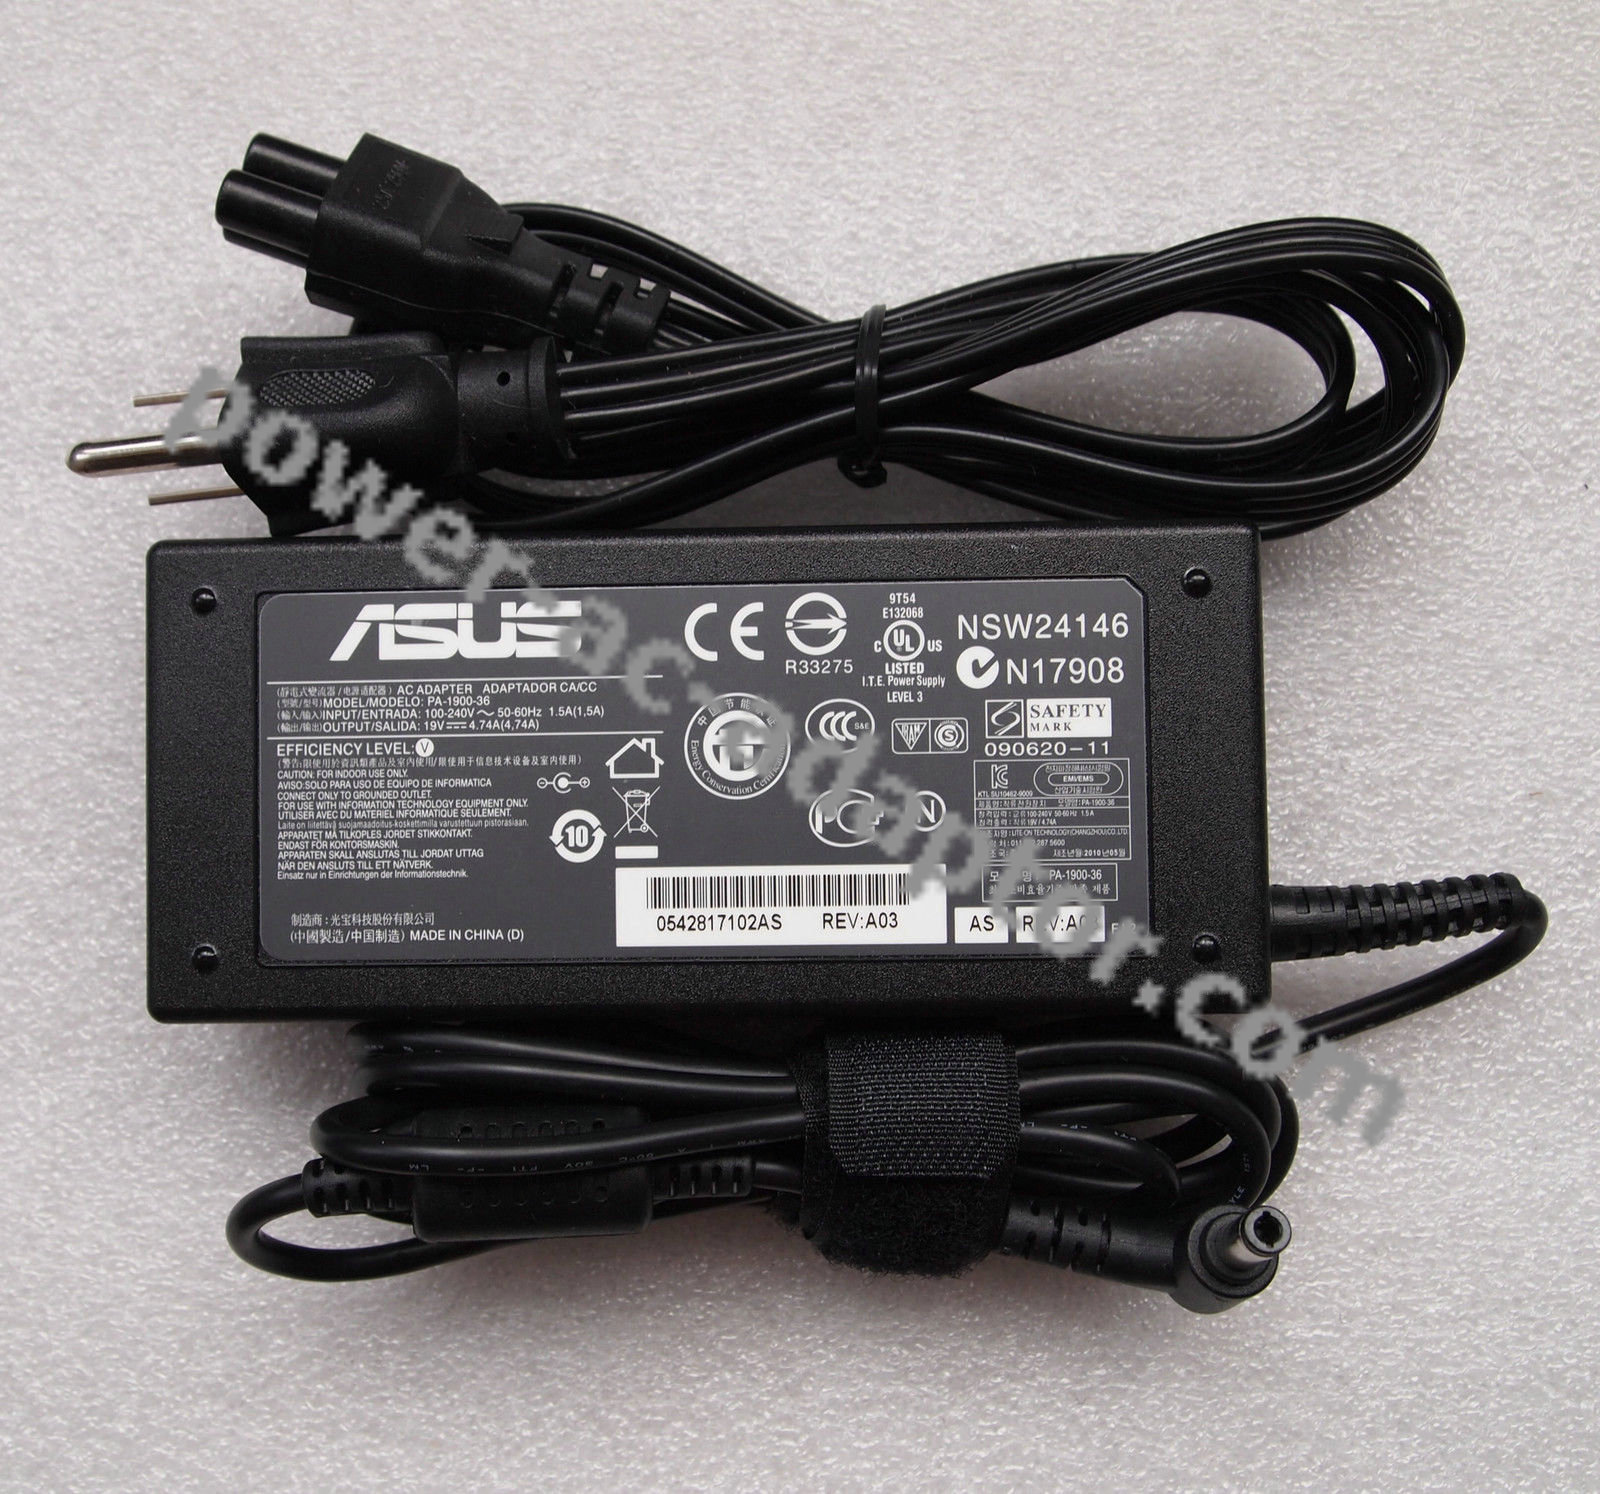 19V 4.74A AC Adapter for Asus PA-1900-36 N17908 NSW24146 R33275